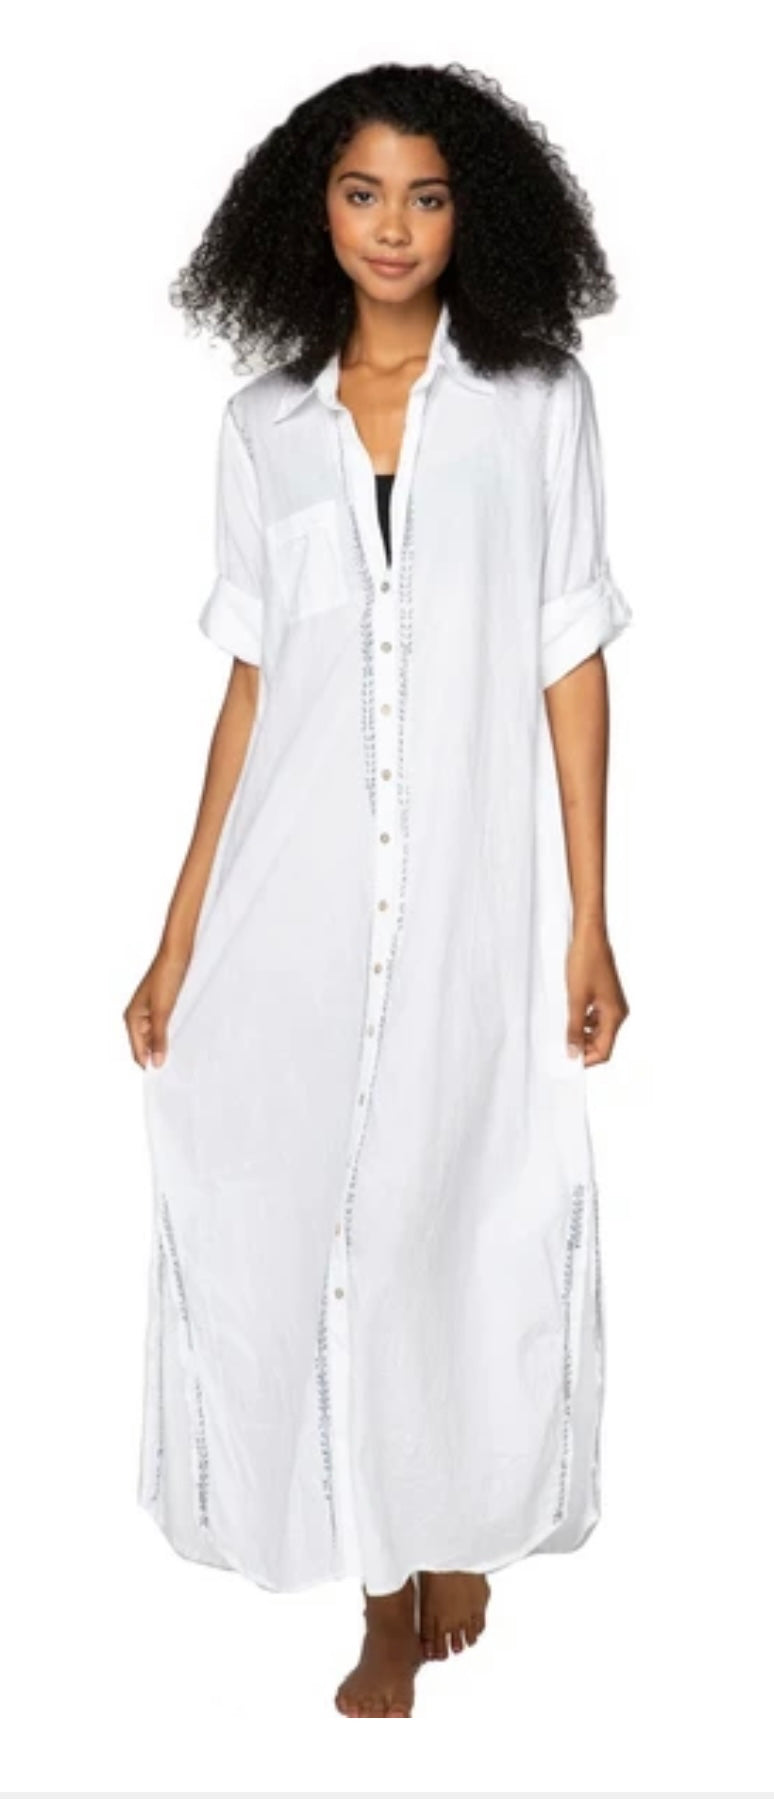 white dress with rolled sleeves. the dress has buttons going down the length of the dress and a front pocket. Silver embroidery down the buttons and the slits on the side of the dress.